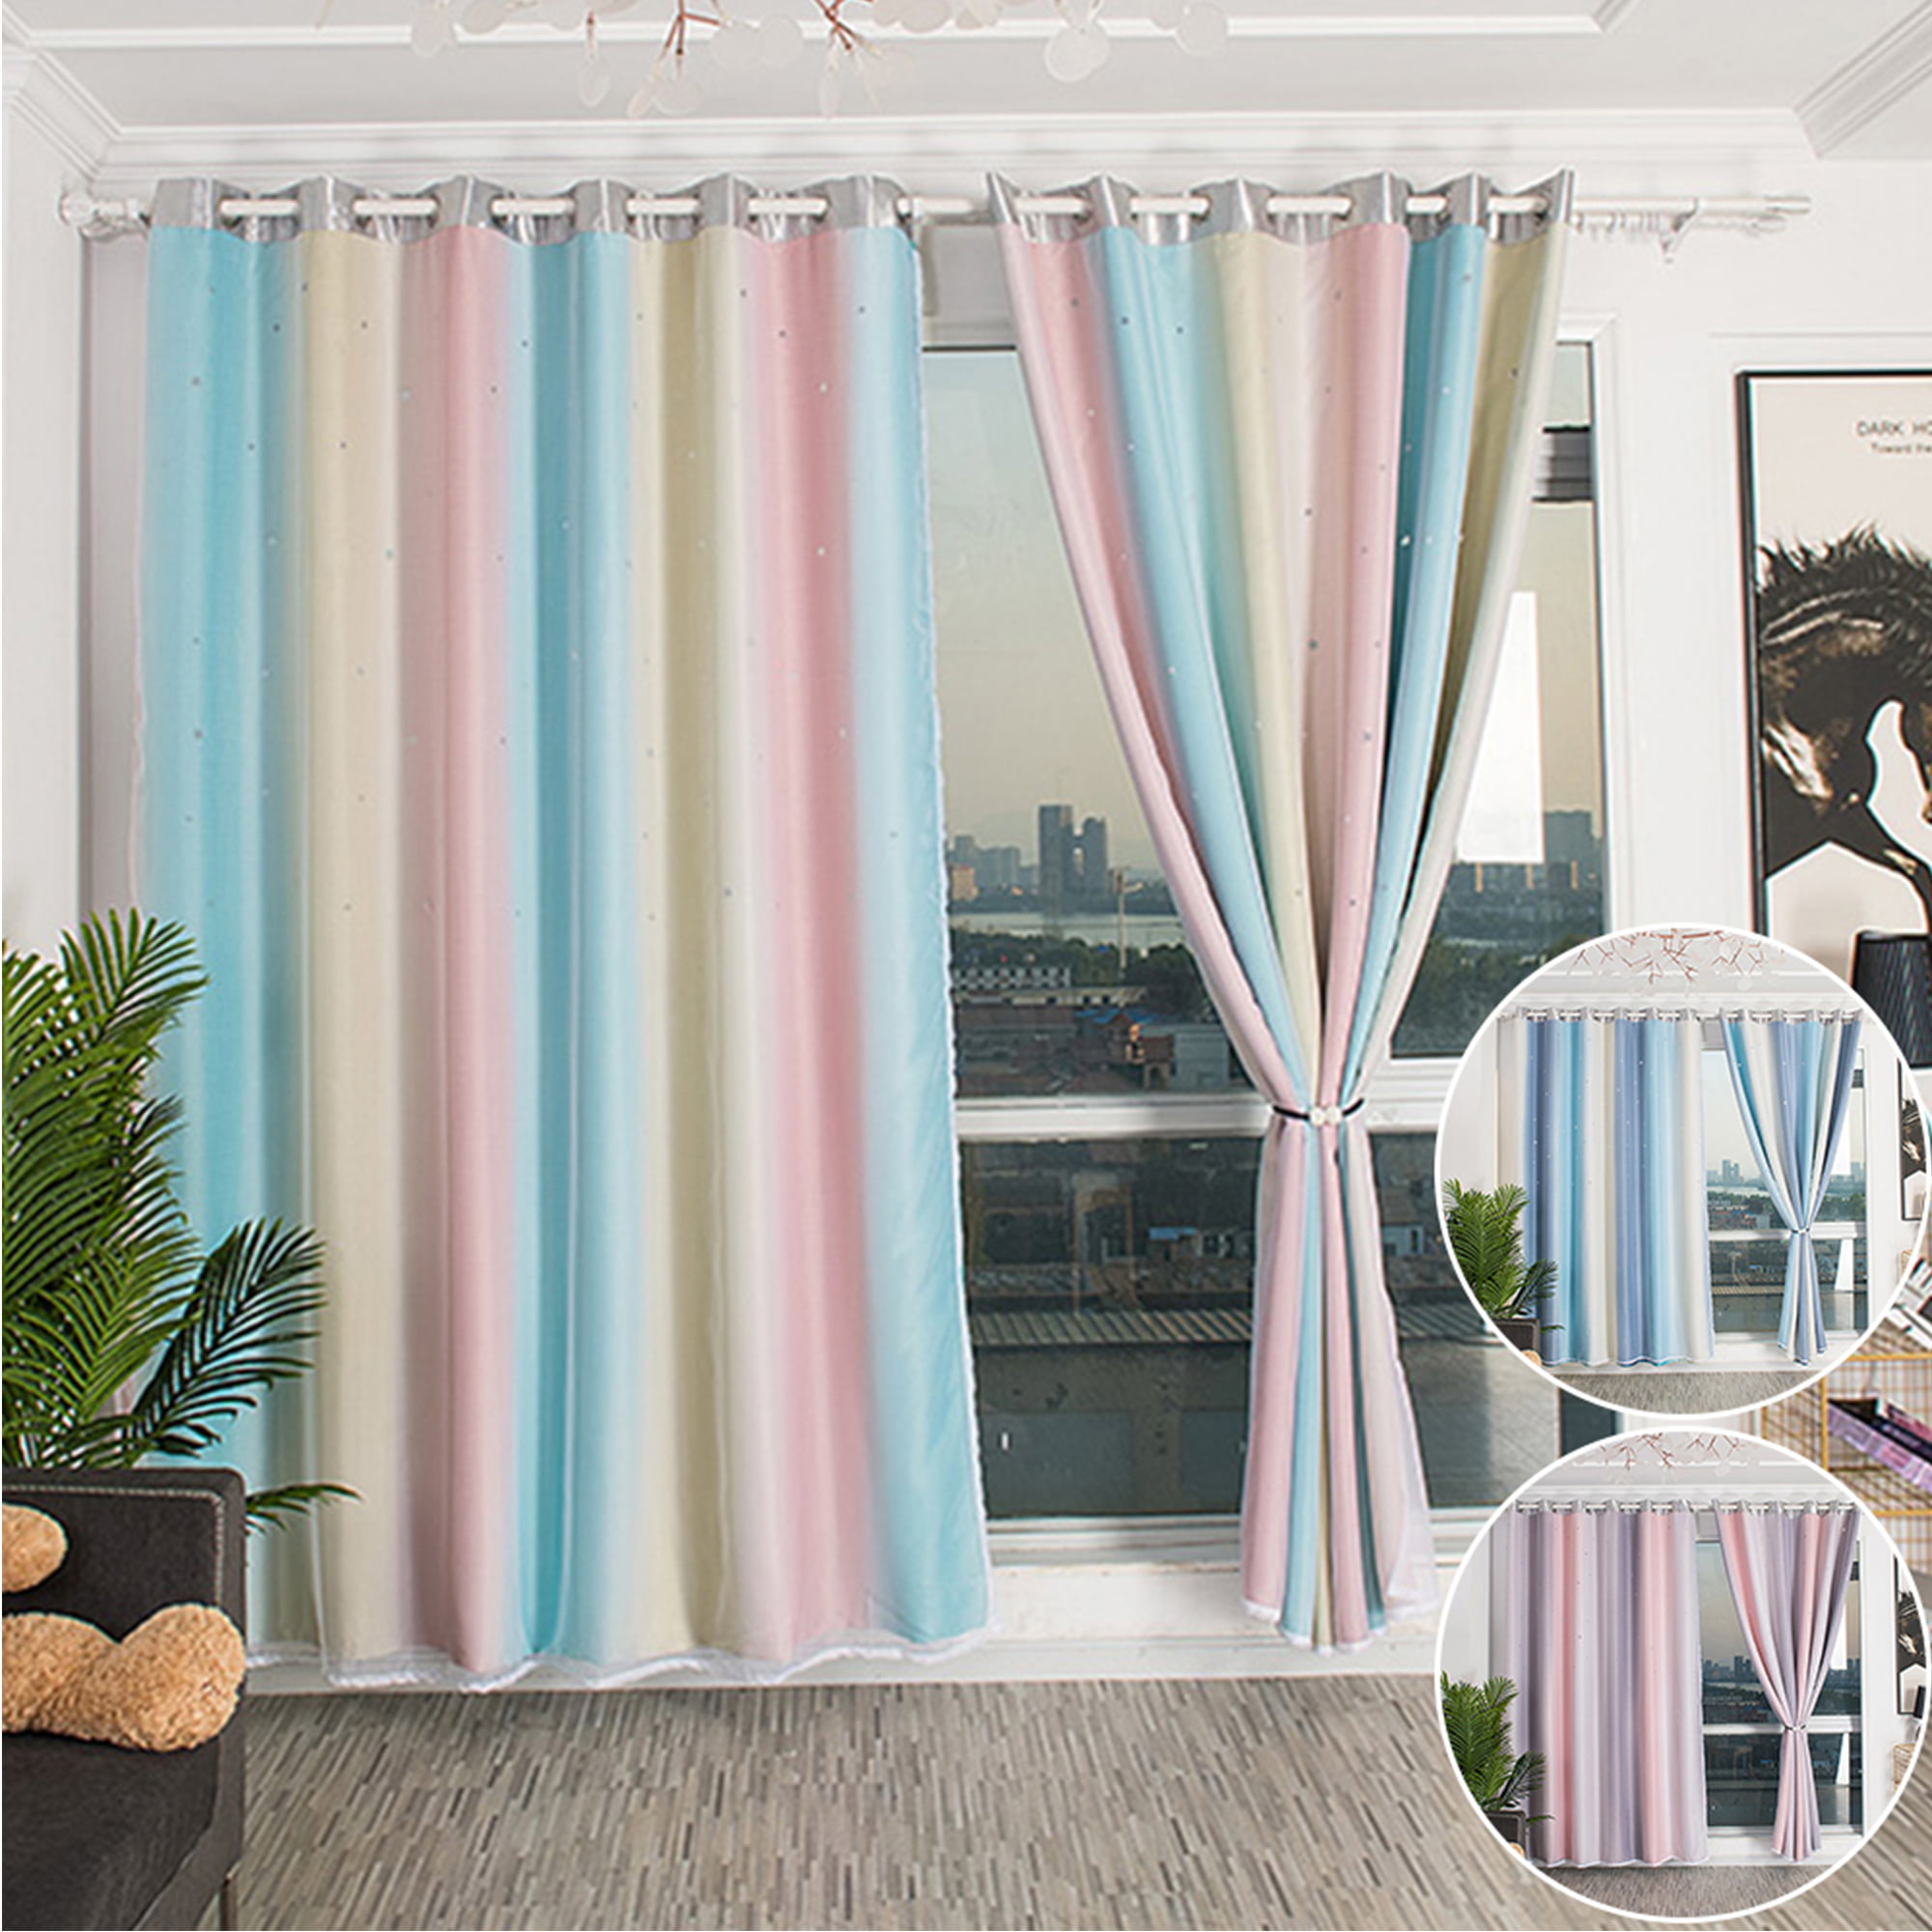 2 Layer Stars Window Curtain Blackout & Tulle Drapes Living Room Bedroom Decor 